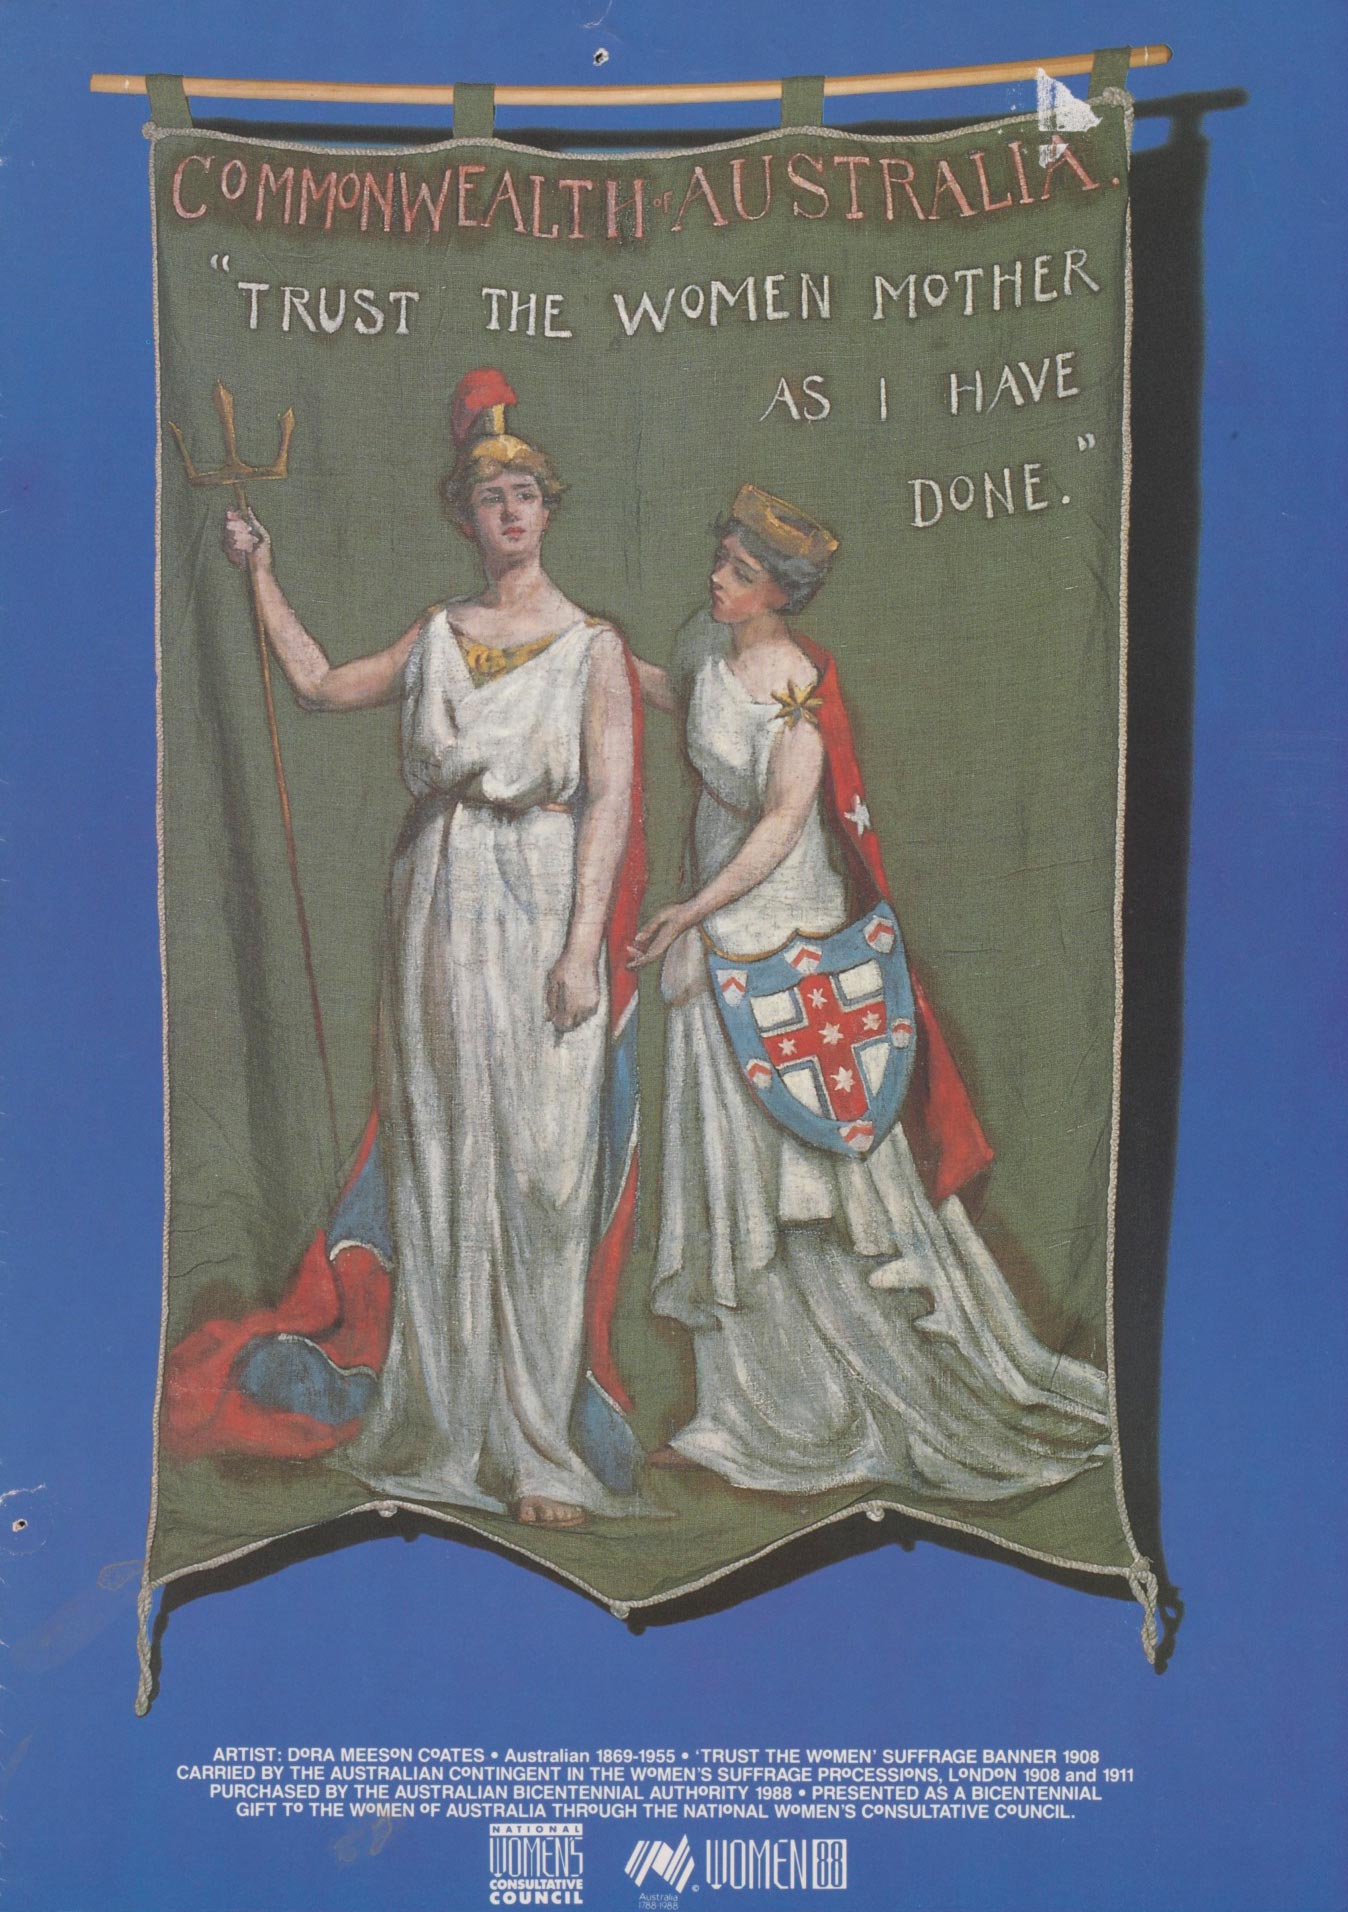 Banner encouraging the United Kingdom to give women the vote, by Dora Meeson Coates, 1908.